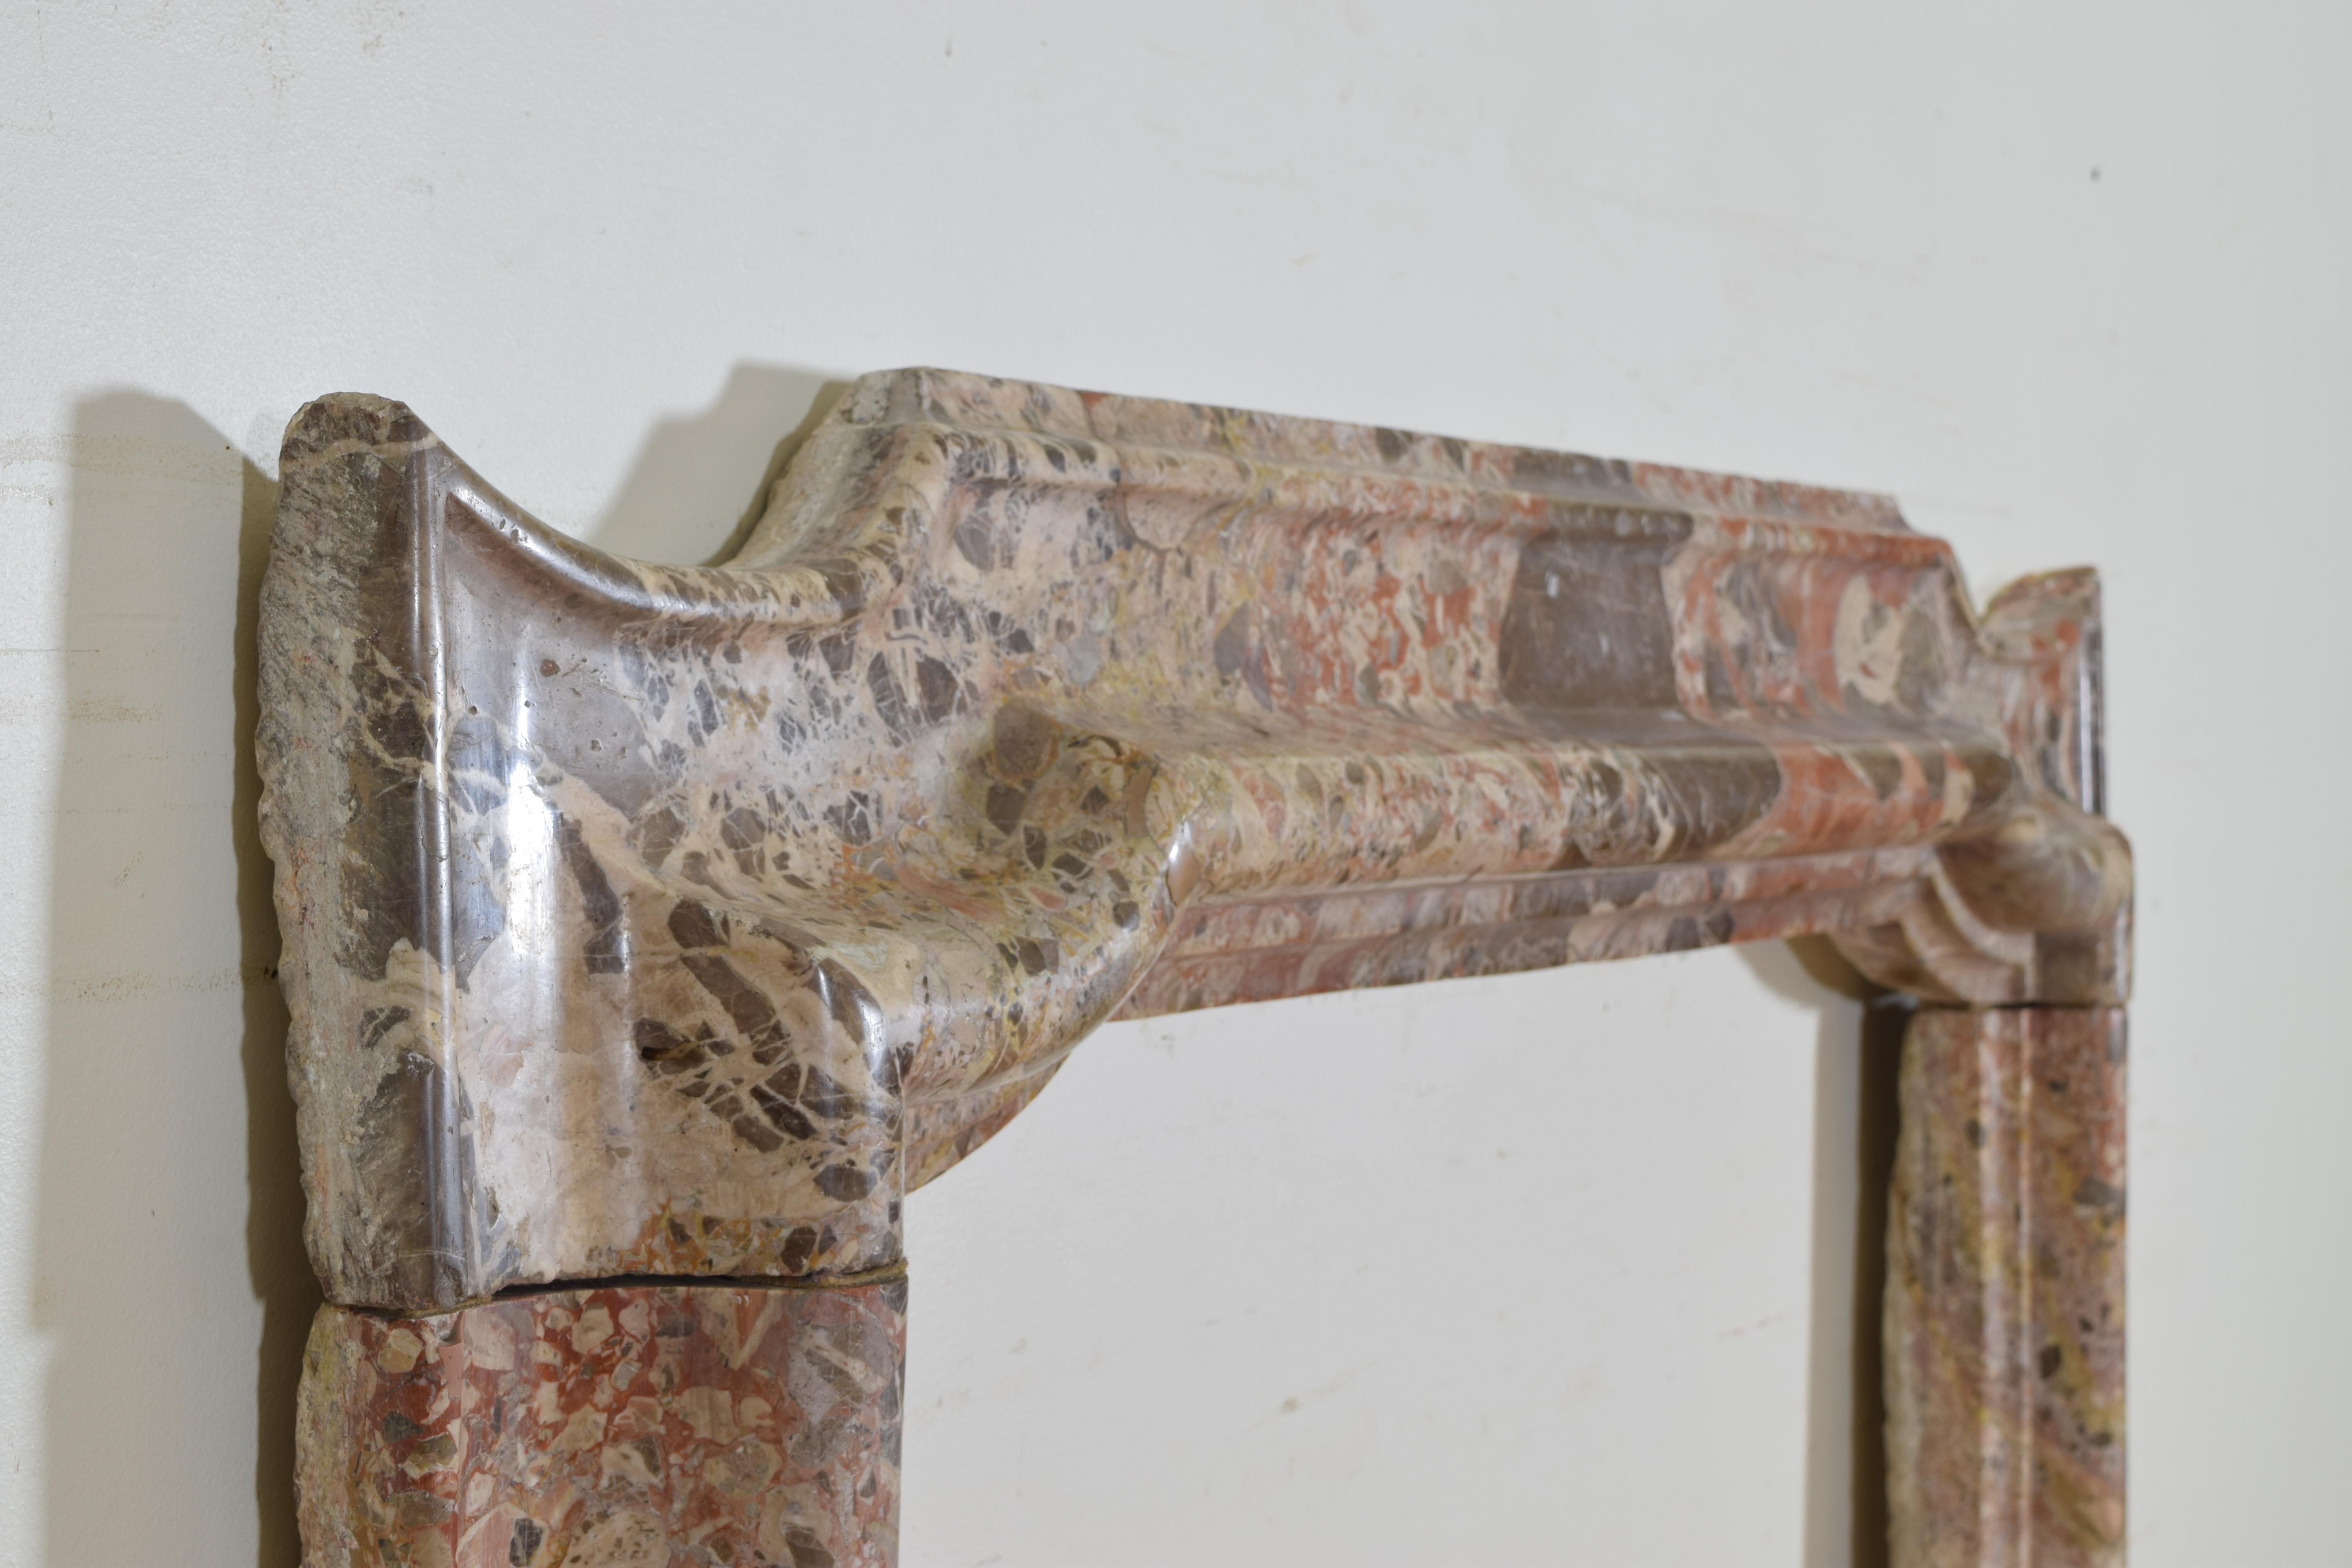 Italian Marble Mantelpiece from Early 18th Century, Louis XIV Period For Sale 2